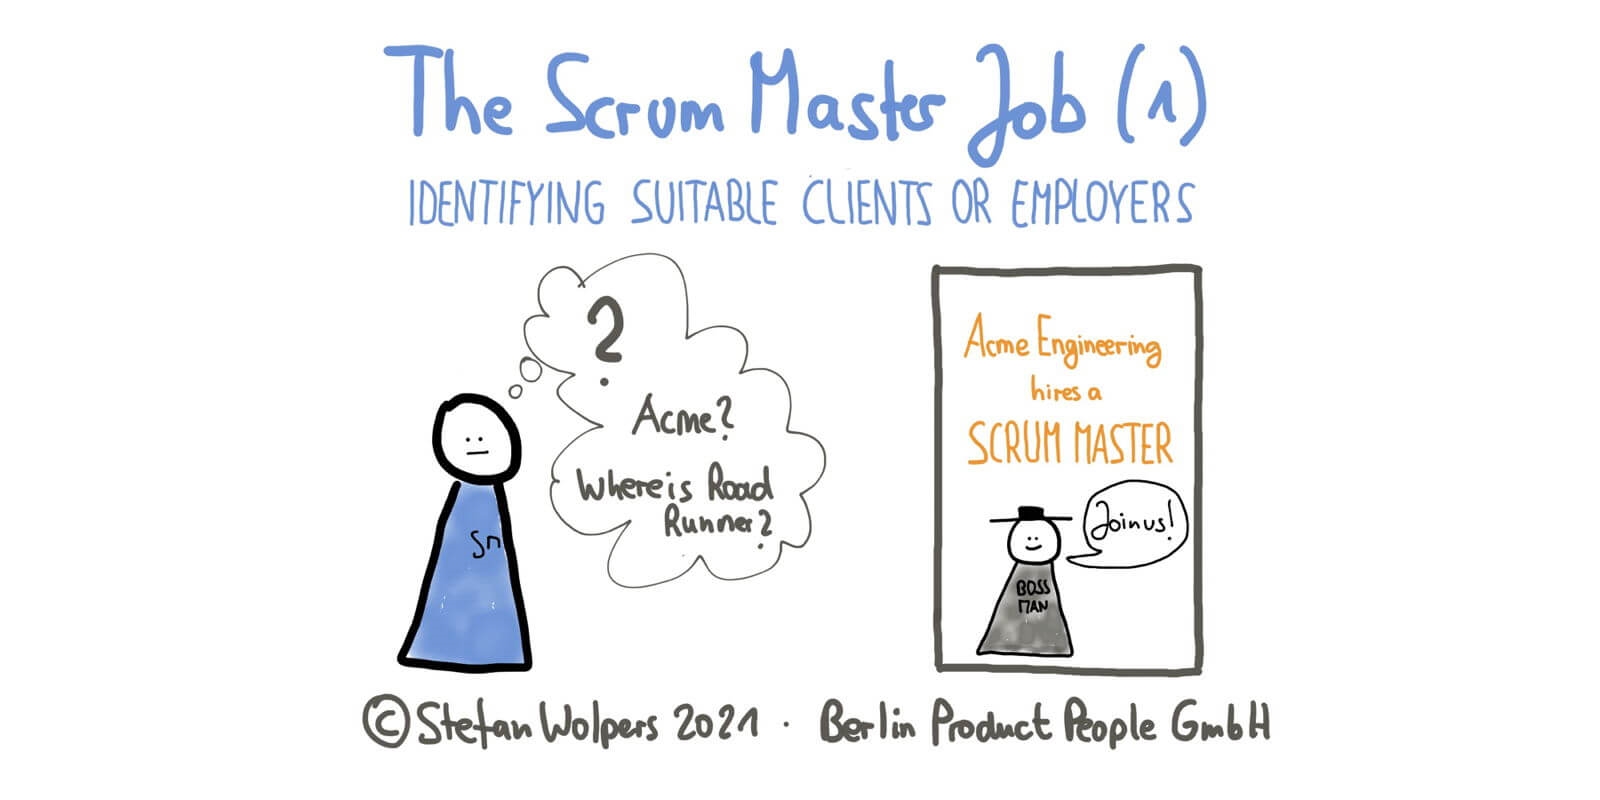 The Scrum Master Job (1): 4 Steps to Identify Suitable Employers or Clients